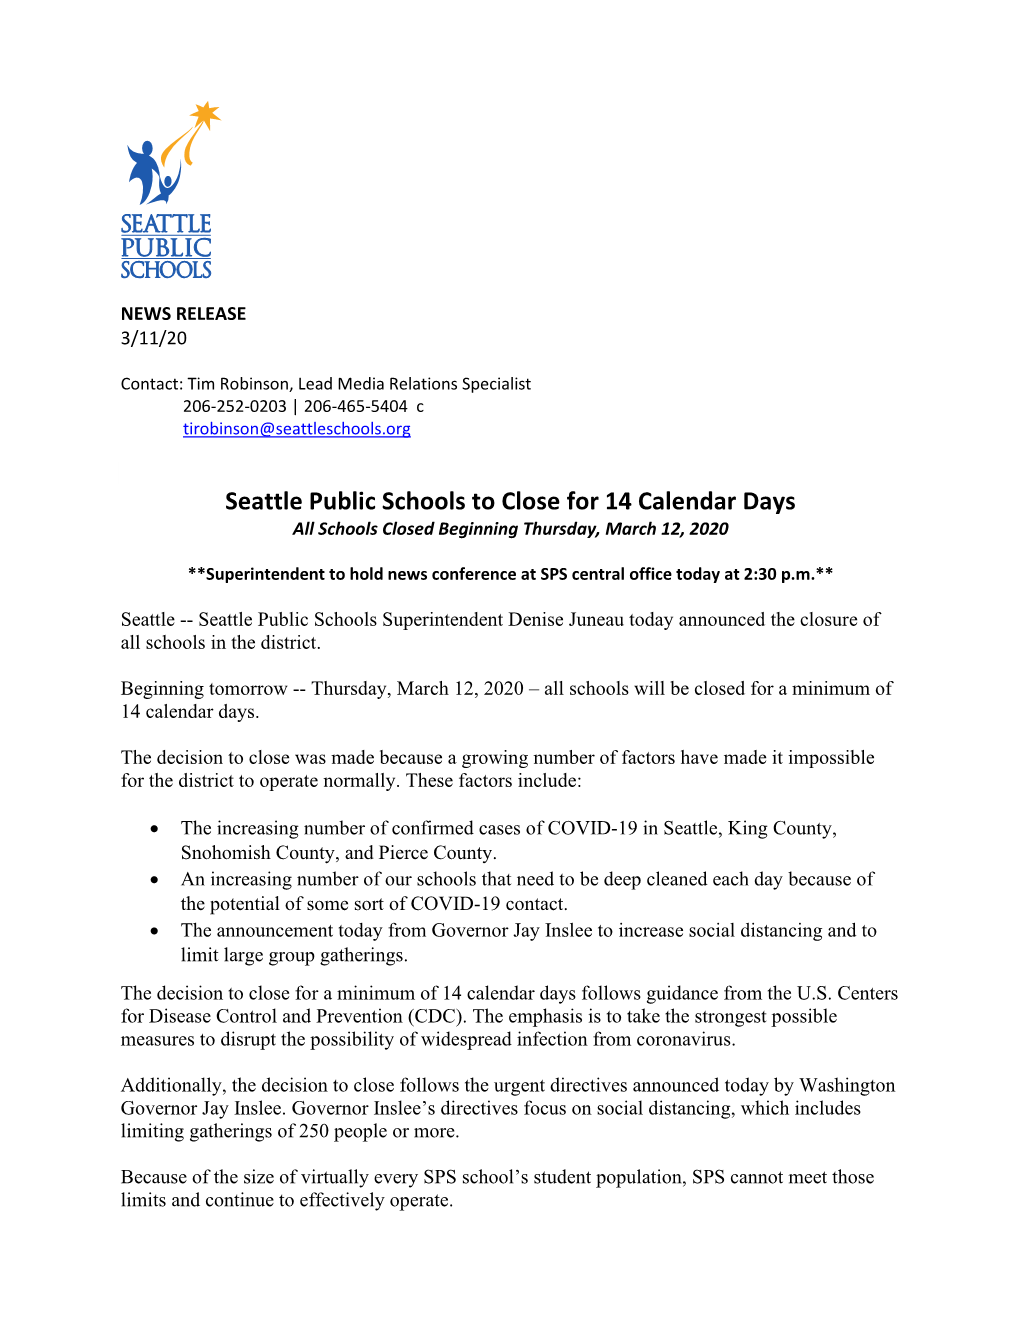 Seattle Public Schools to Close for 14 Calendar Days All Schools Closed Beginning Thursday, March 12, 2020